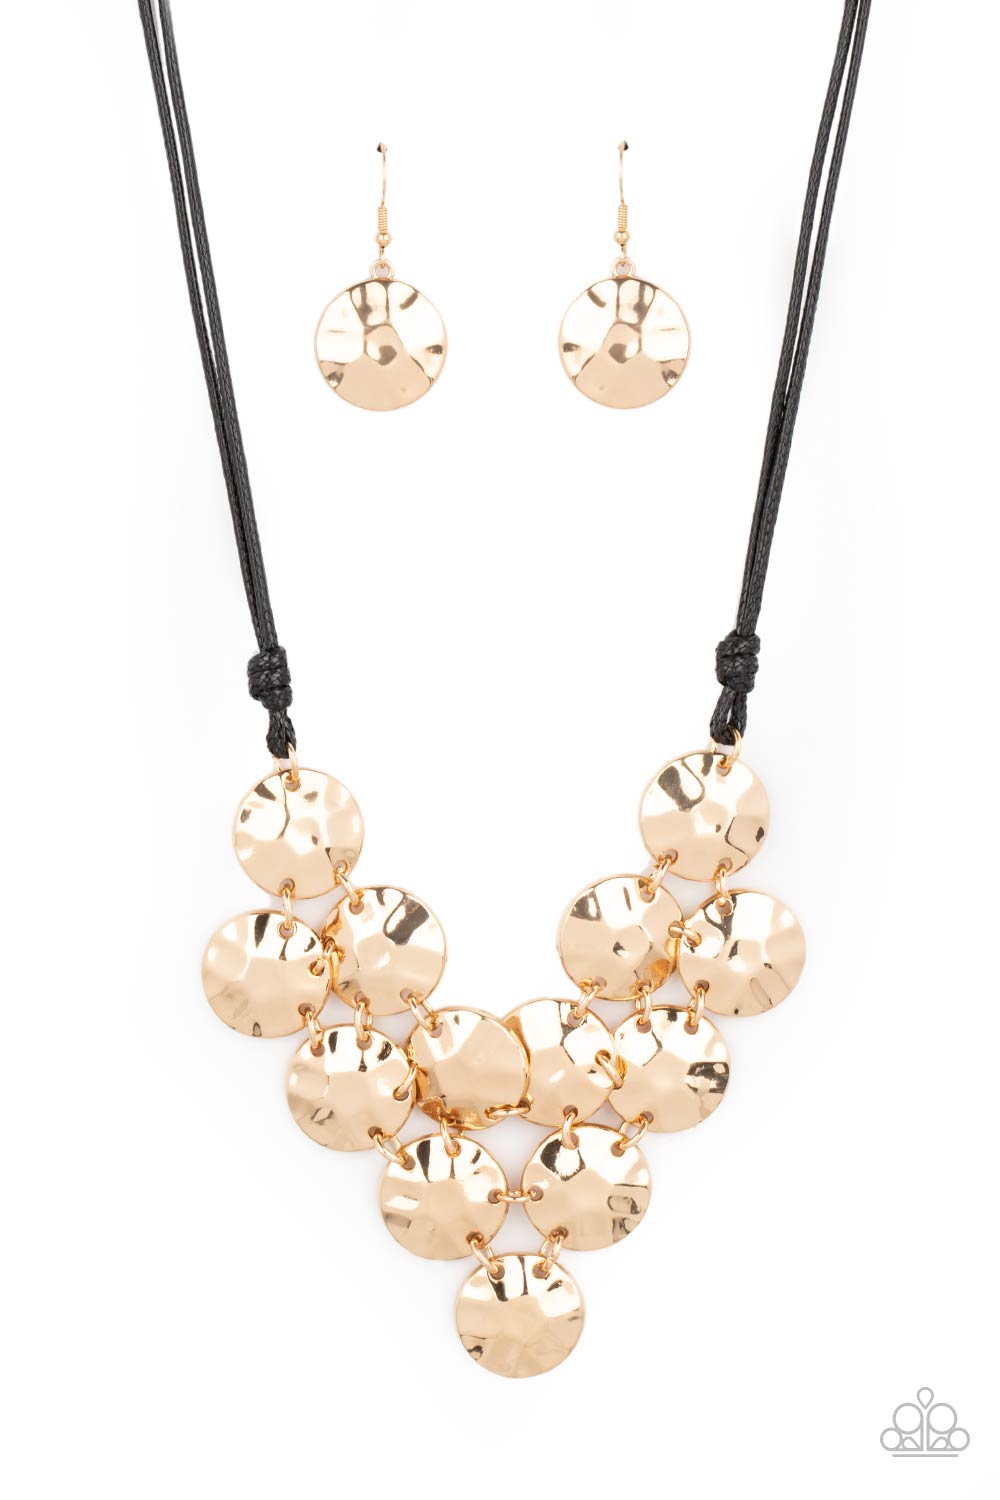 Token Treasure Gold Necklace - Paparazzi Accessories  Featuring a hammered finish, a collection of glistening gold discs delicately connect into a netted pendant at the bottom of knotted black cords for a statement-making look. Features an adjustable clasp closure.  All Paparazzi Accessories are lead free and nickel free!  Sold as one individual necklace. Includes one pair of matching earrings.